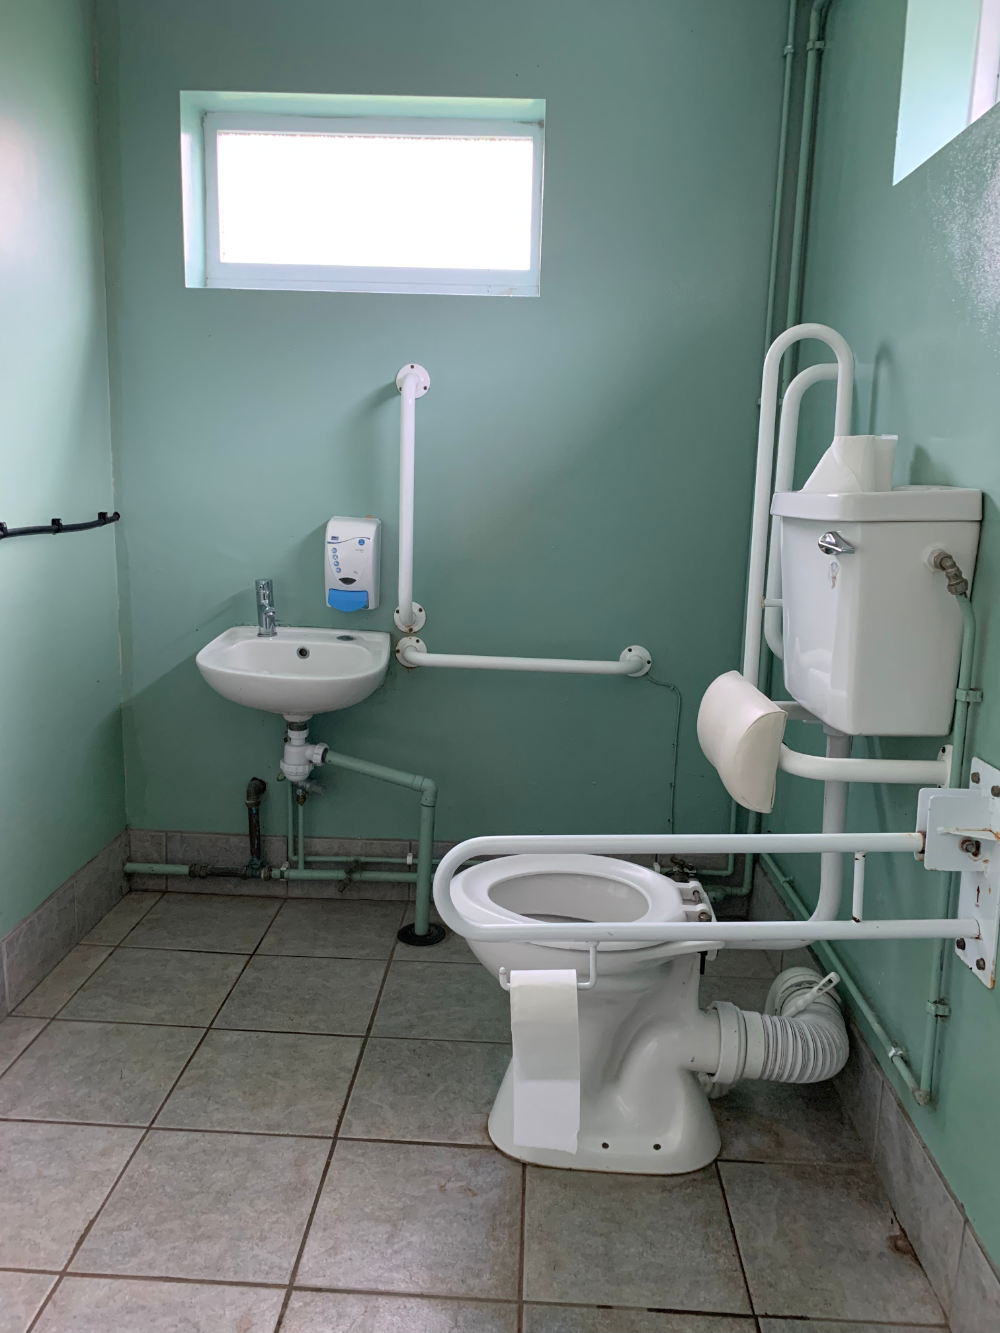 Photo of an accessible toilet with several grab bars and washing up sink